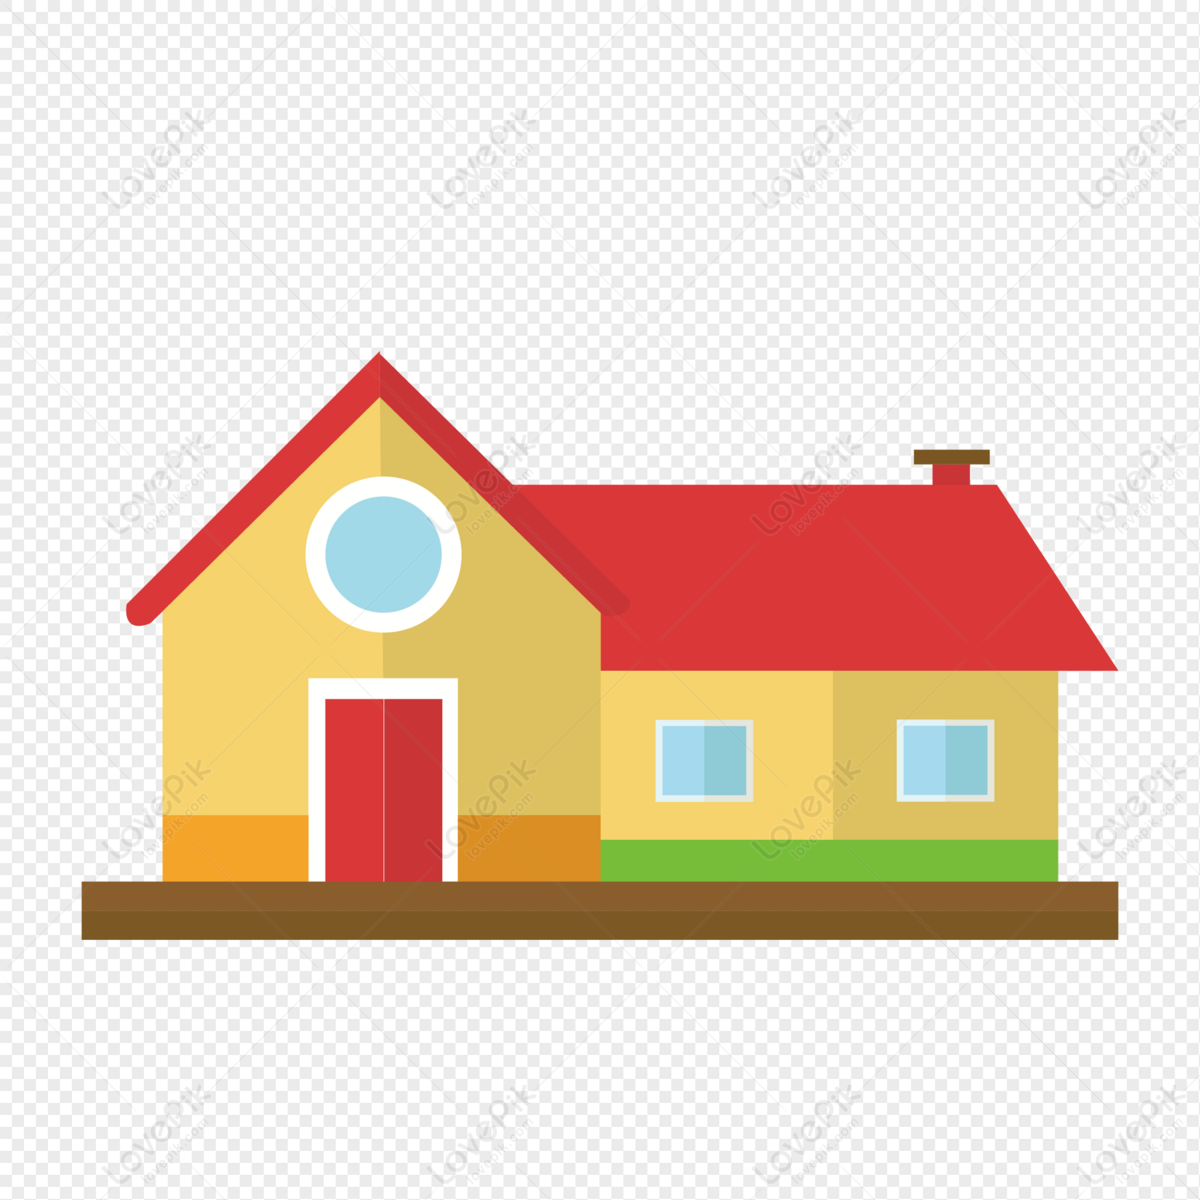 Red House PNG Hd Transparent Image And Clipart Image For Free Download ...